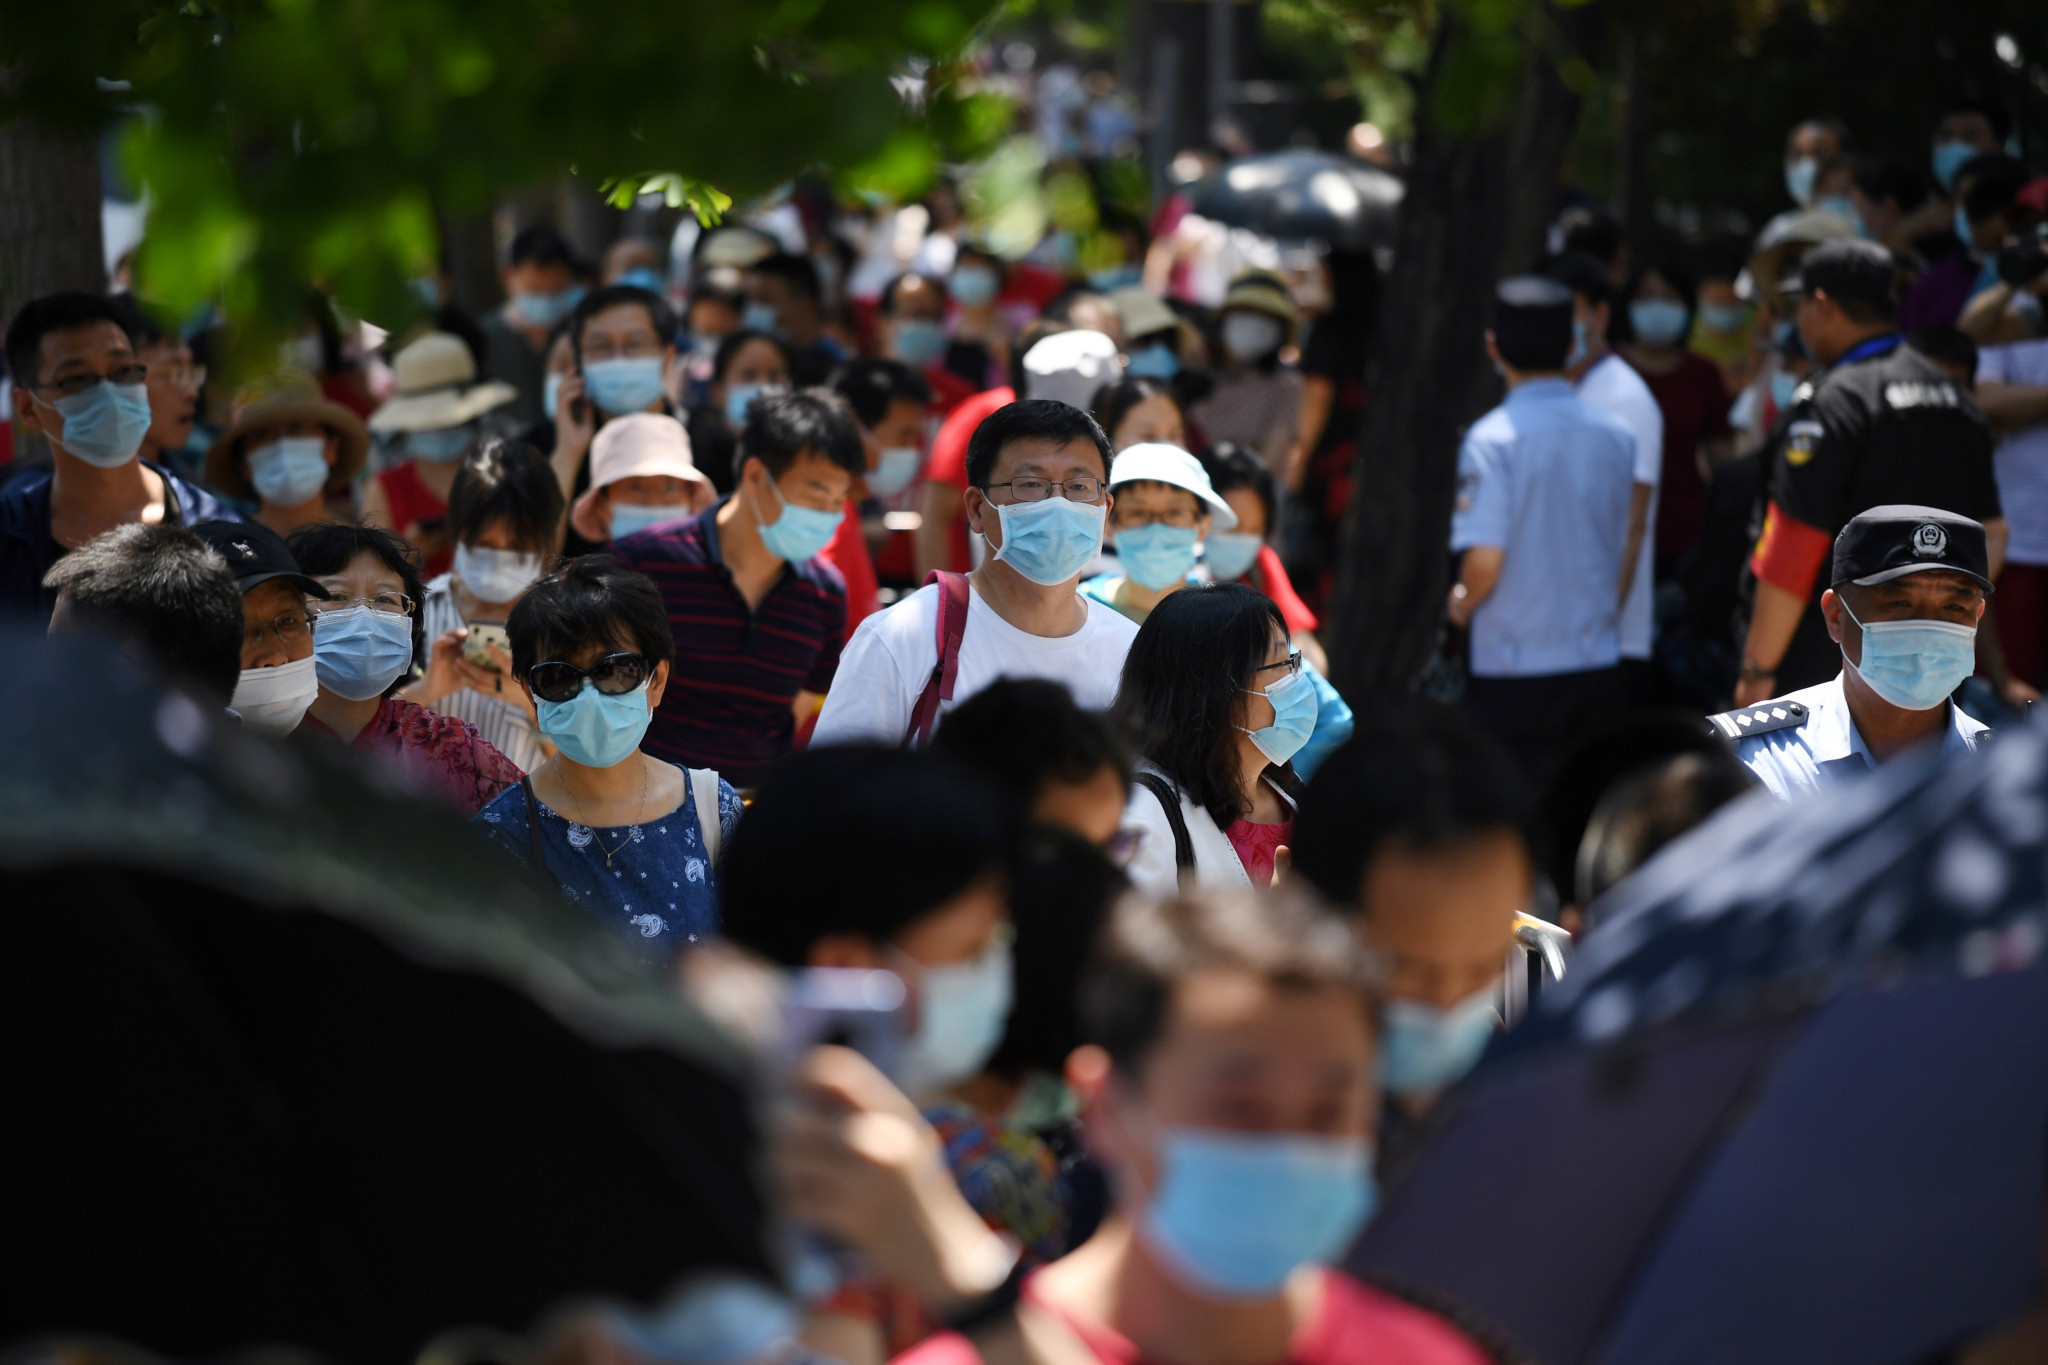 China claims to have had a relatively small number of coronavirus cases compared to the rest of the world but is cautious about international events contributing to an increase in numbers ©Getty Images